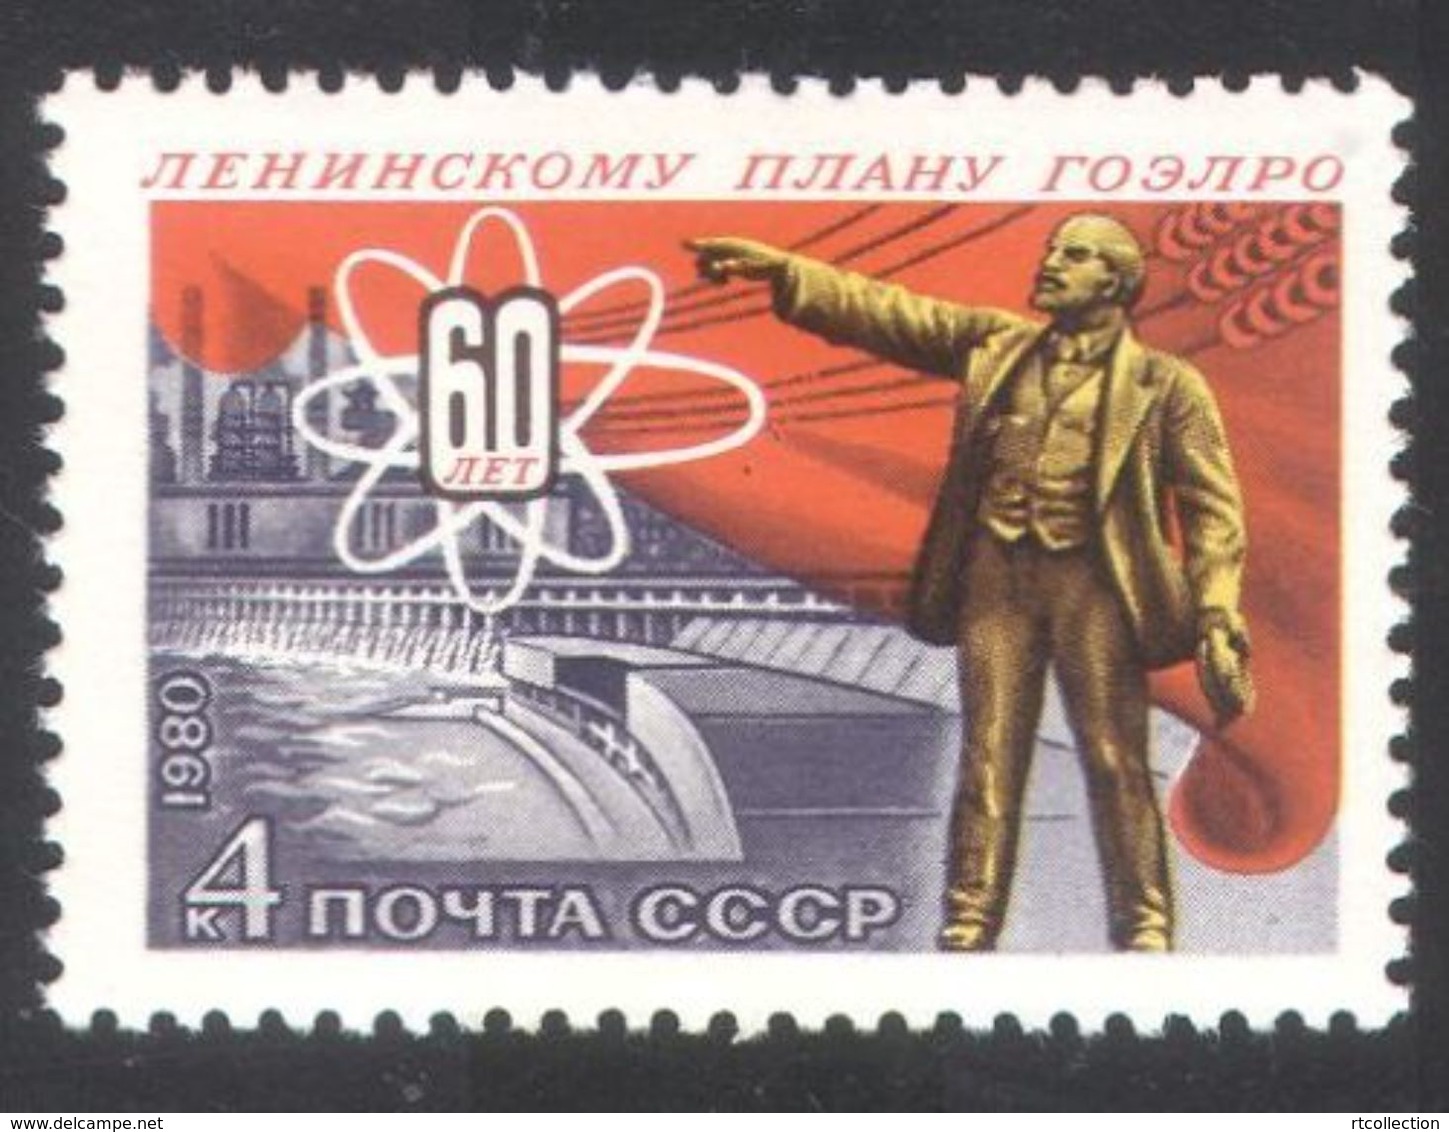 USSR Russia 1980 60th Ann Electification Plan Lenin Famous People Politician Celebrations Flag Stamp MNH Sc 4890 Mi 5021 - Stamps